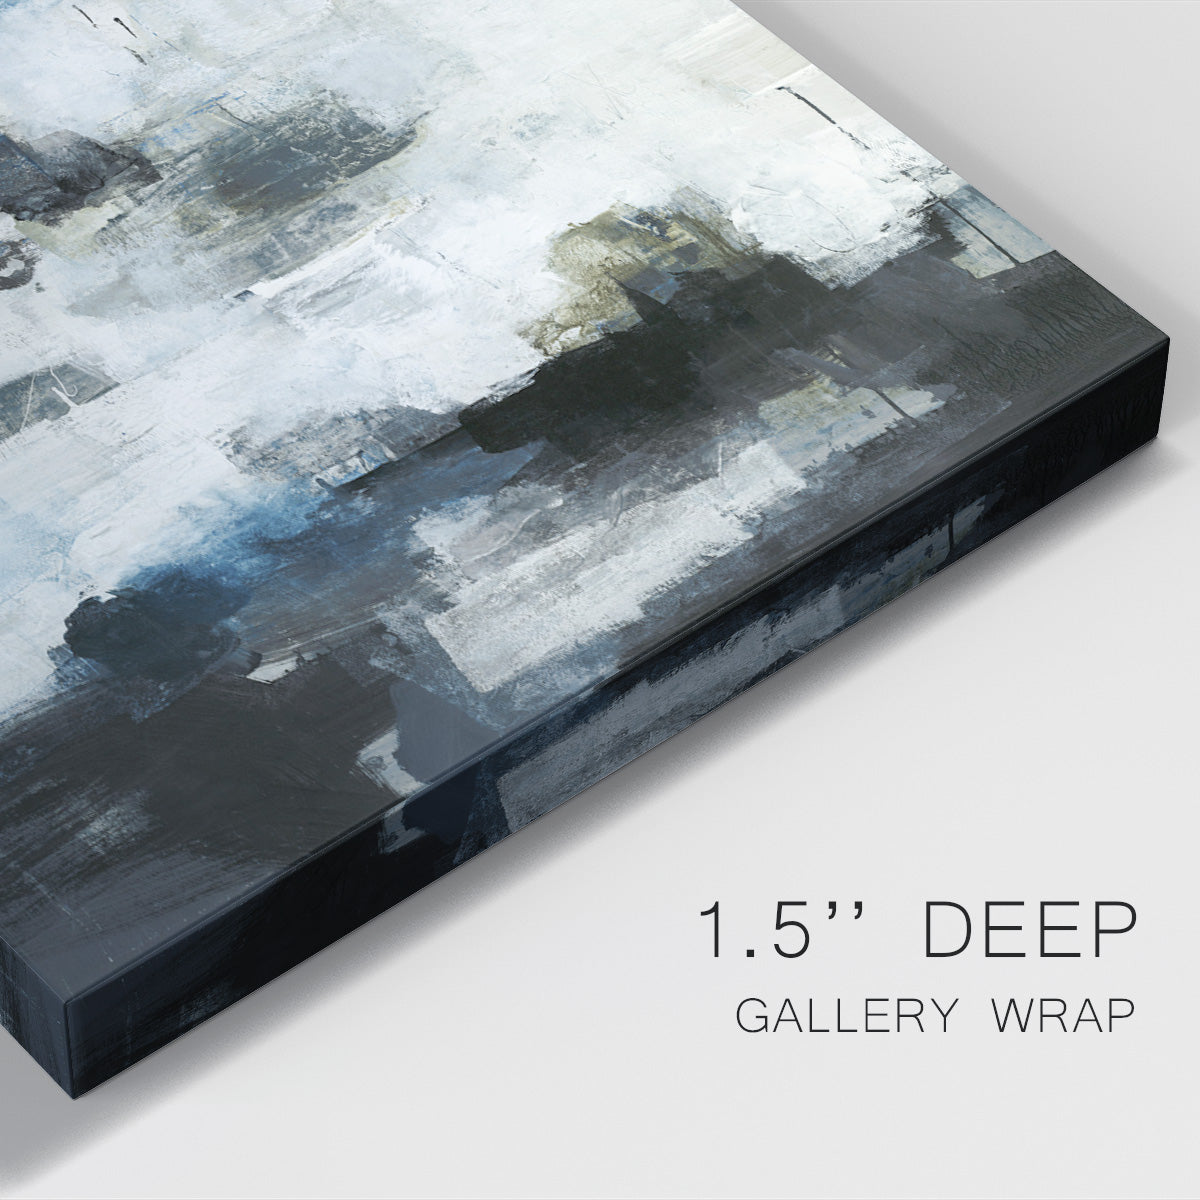 Black & Blue Premium Gallery Wrapped Canvas - Ready to Hang